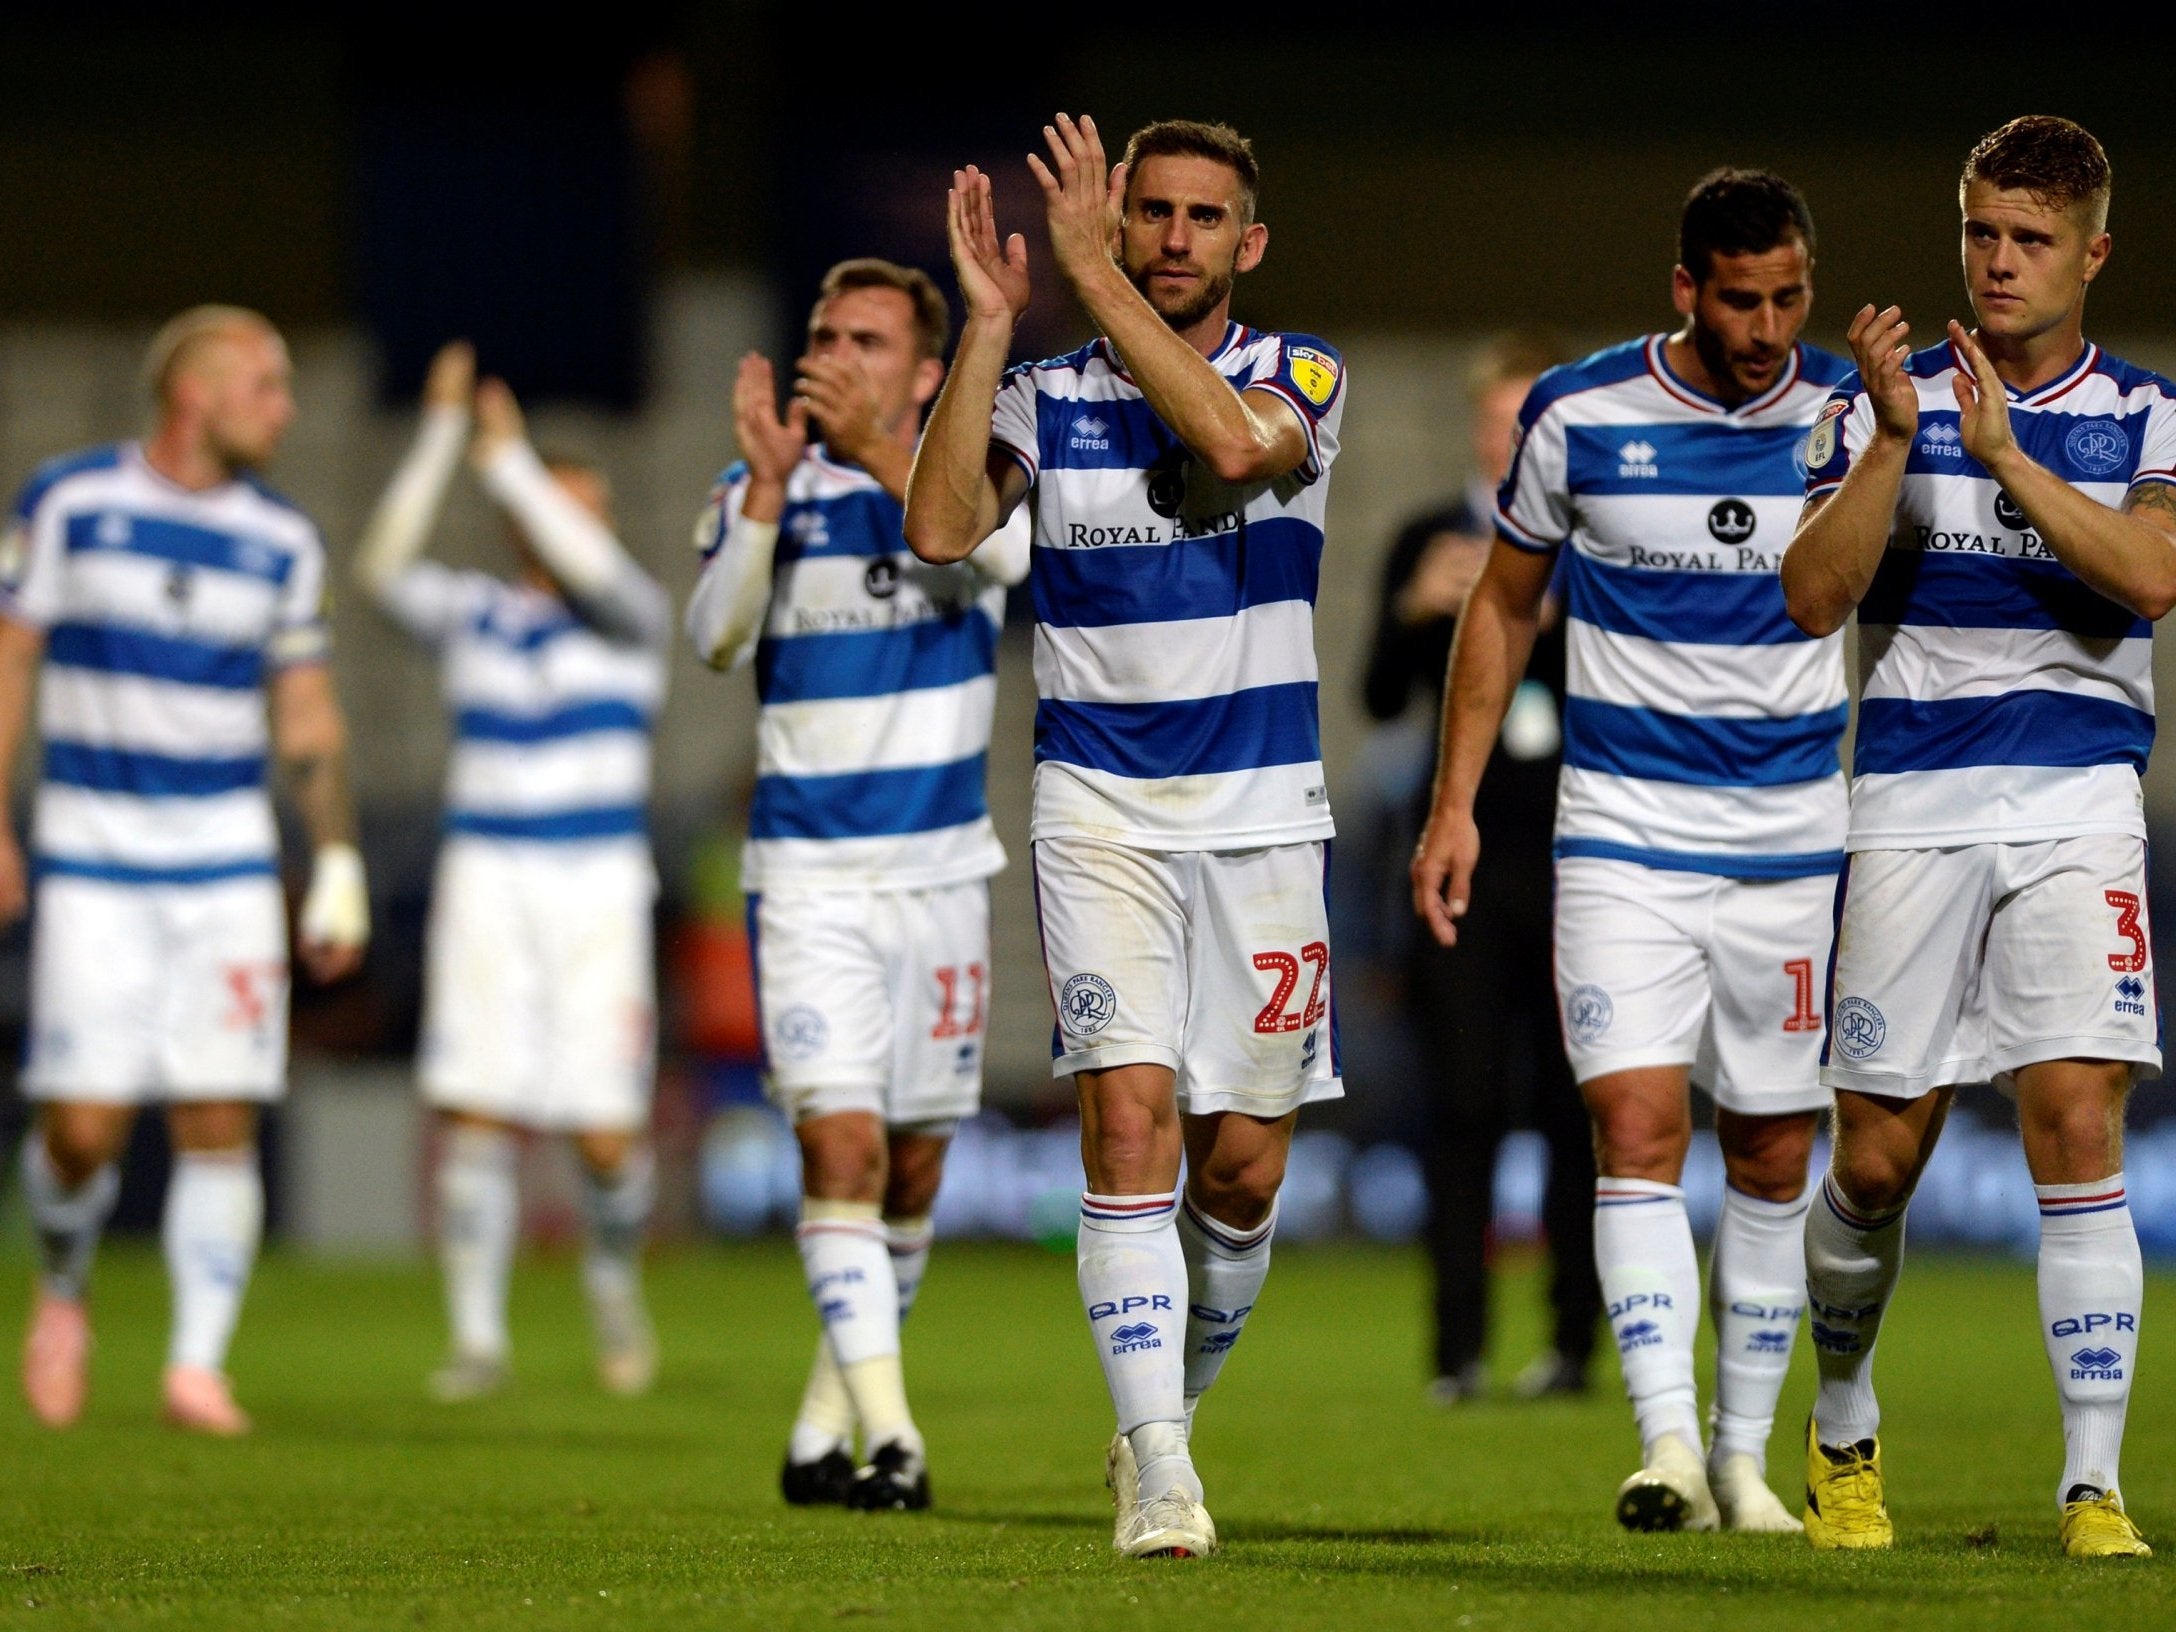 QPR's players celebrate their victory over Millwall